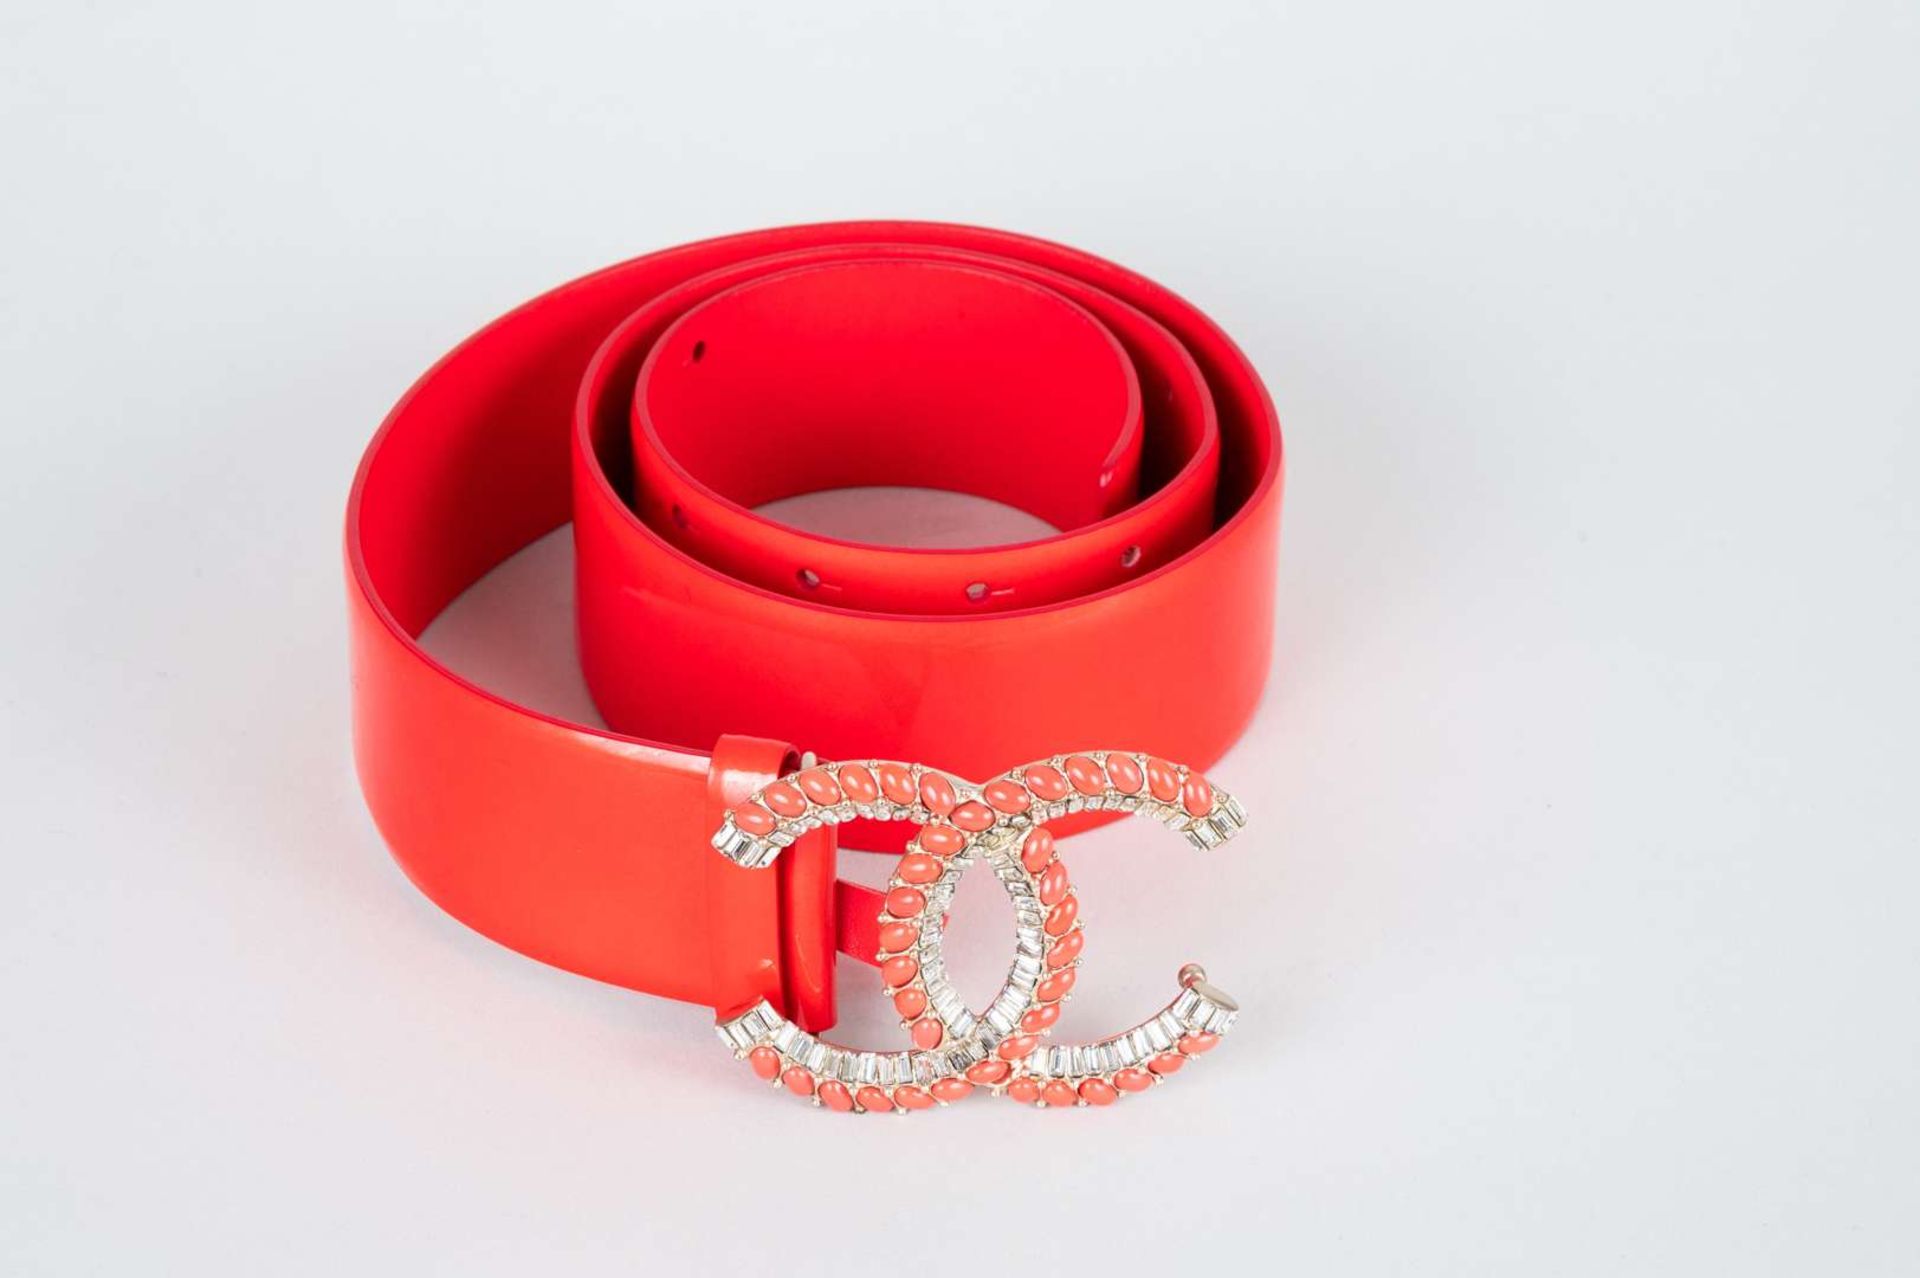 CHANEL, coral red, patent leather belt - Image 2 of 6